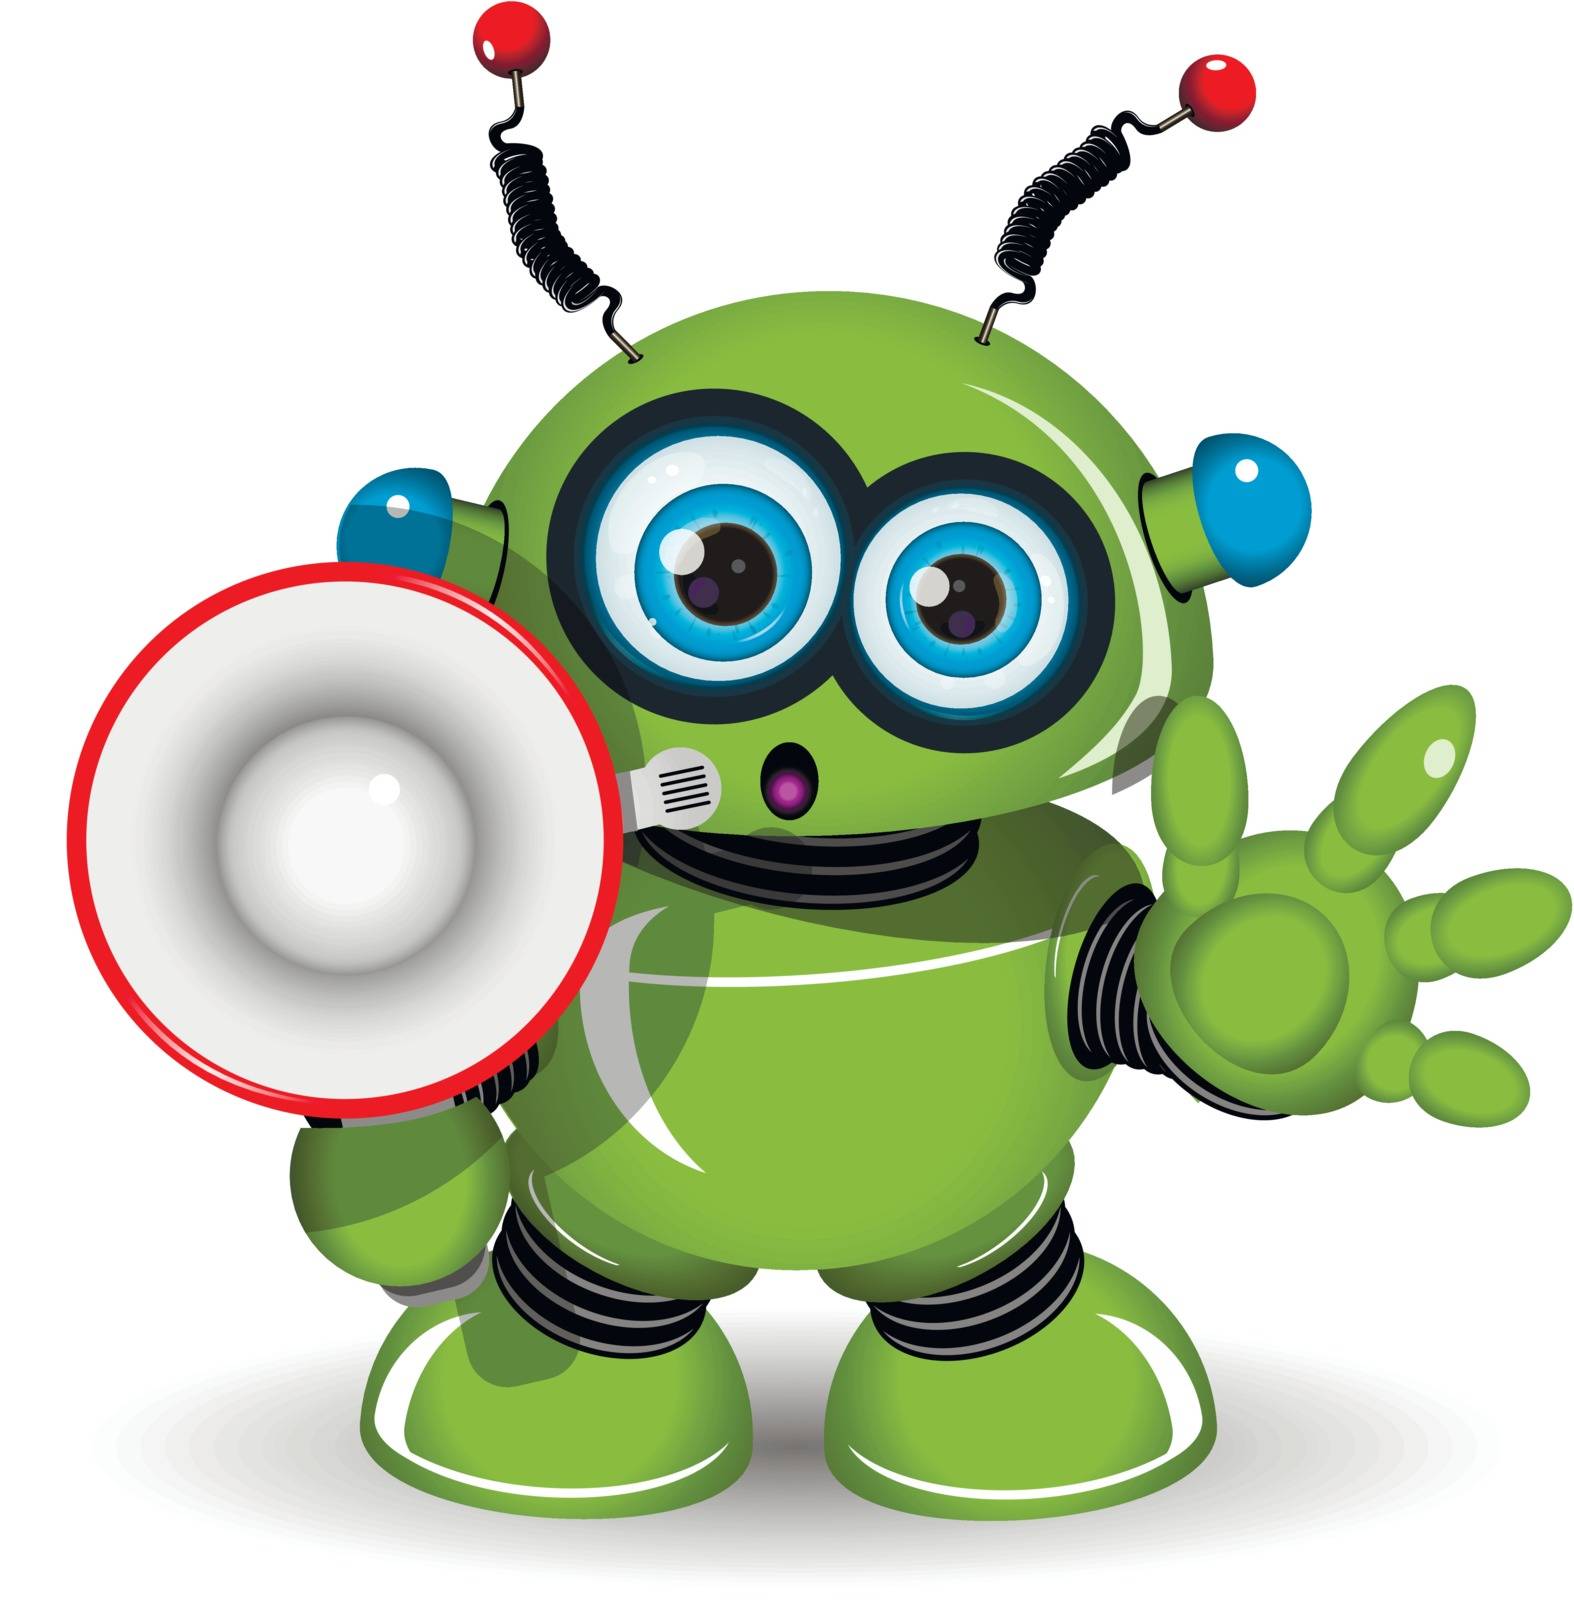 Illustration of a green robot with speaker